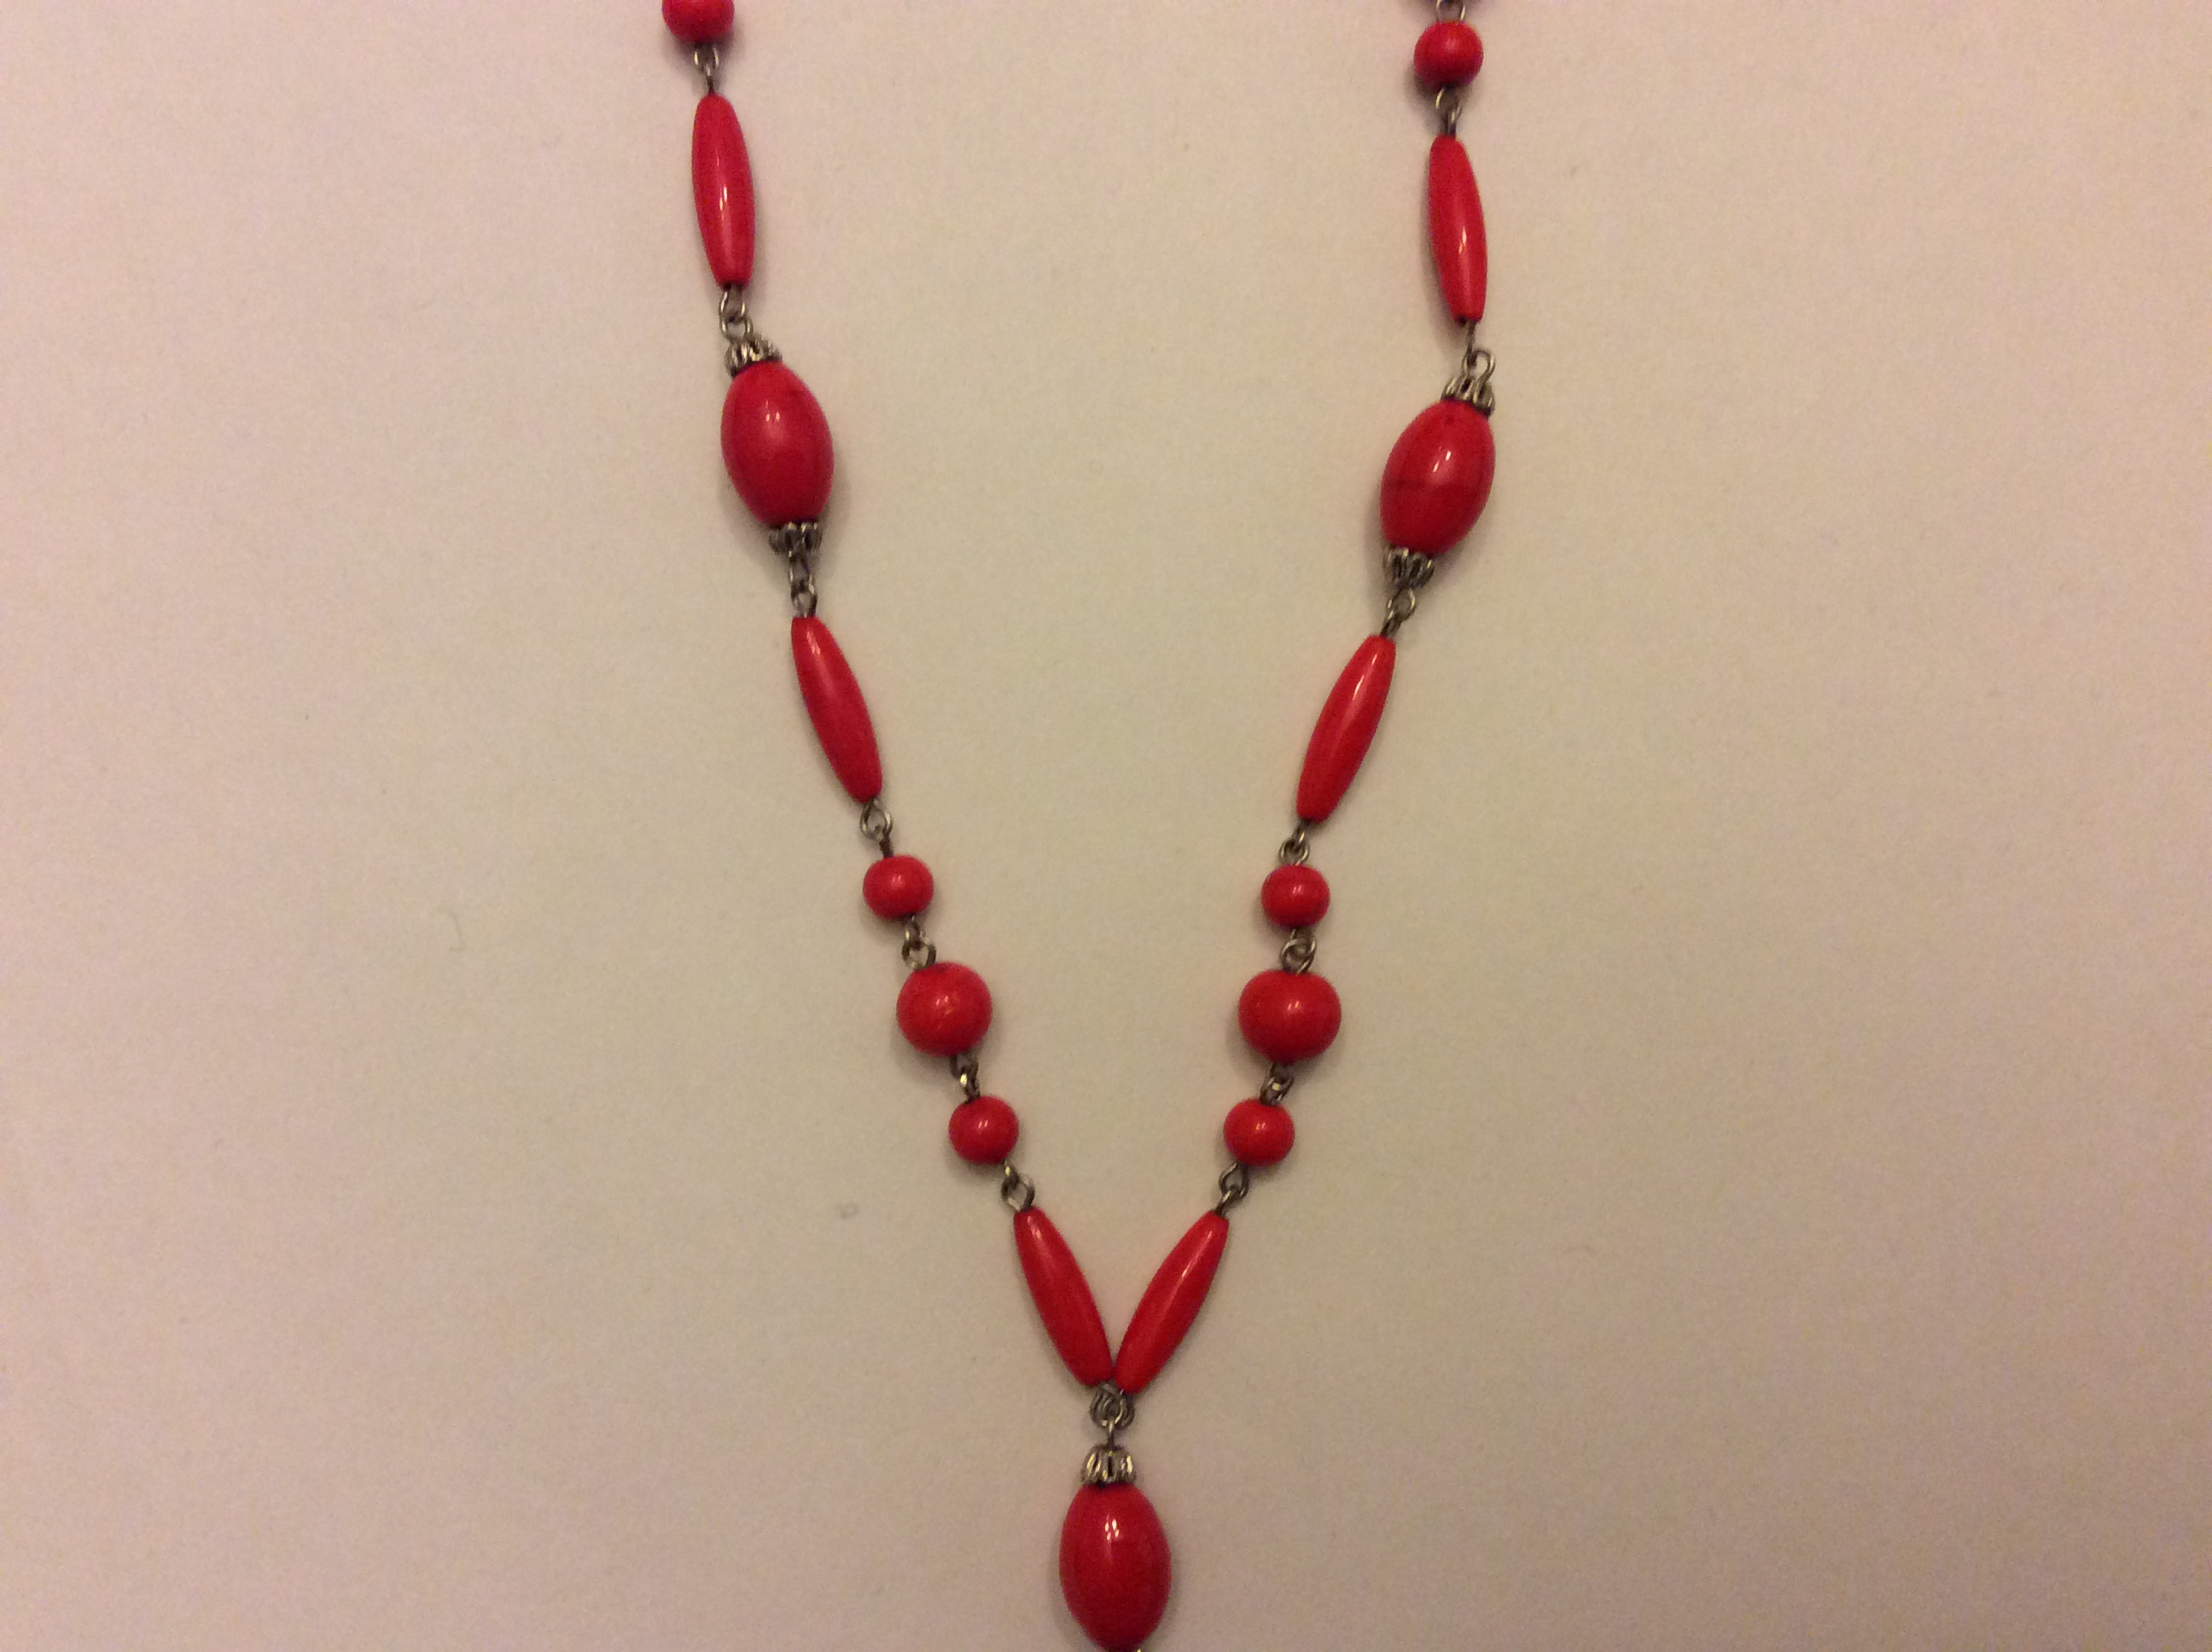 Necklace red beads.JPG